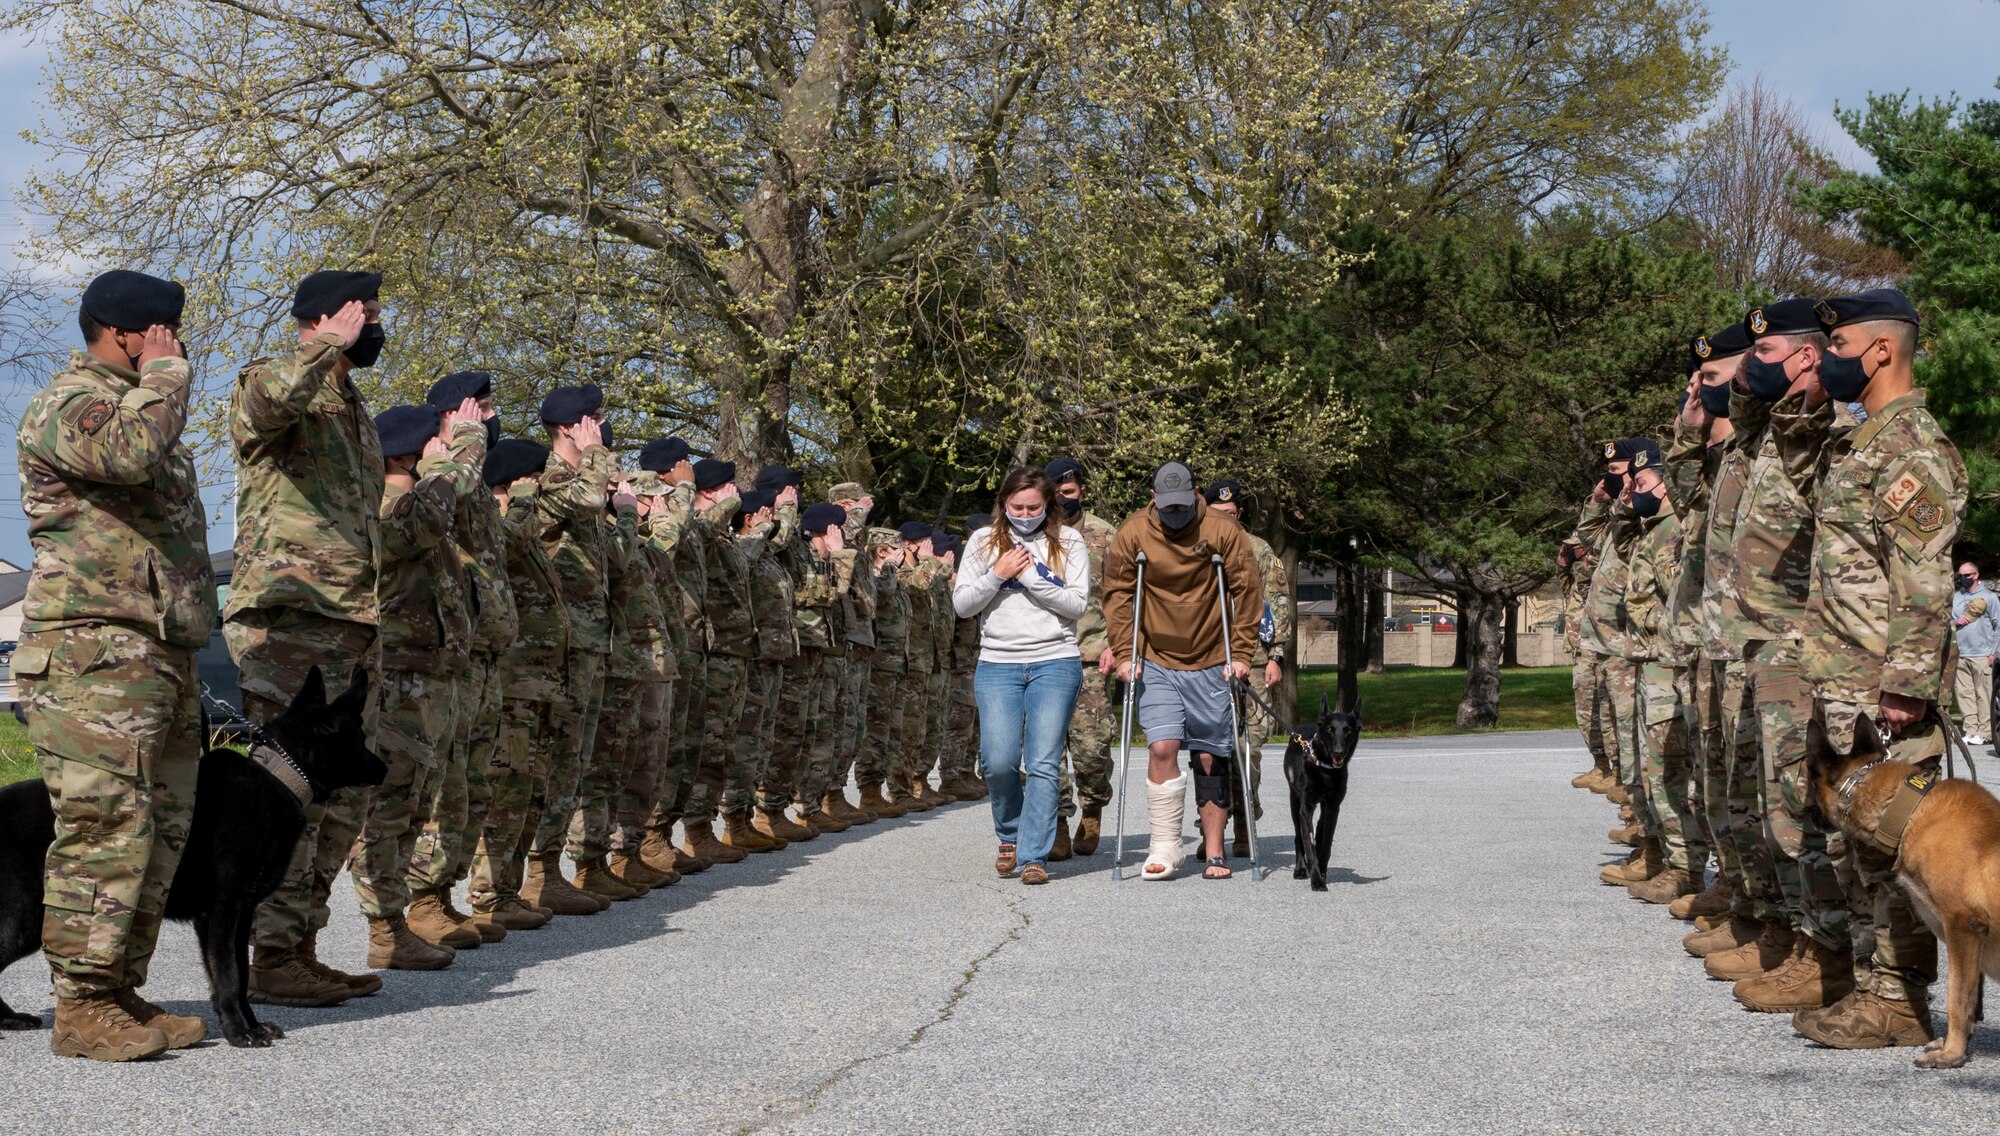 Staff Sgt. Brandon Soto, 436th Security Forces Squadron military working dog handler, and his wife, Emily Soto, walk retired MWD Kali during her last call at Dover Air Force Base, Delaware, April 22, 2021. The last call is a ceremony used to show respect and bid farewell to a fallen police officer or MWD. Following seven years of service, Kali was humanely euthanized after suffering from a tumor in her abdomen. (U.S. Air Force photo by Airman 1st Class Cydney Lee)